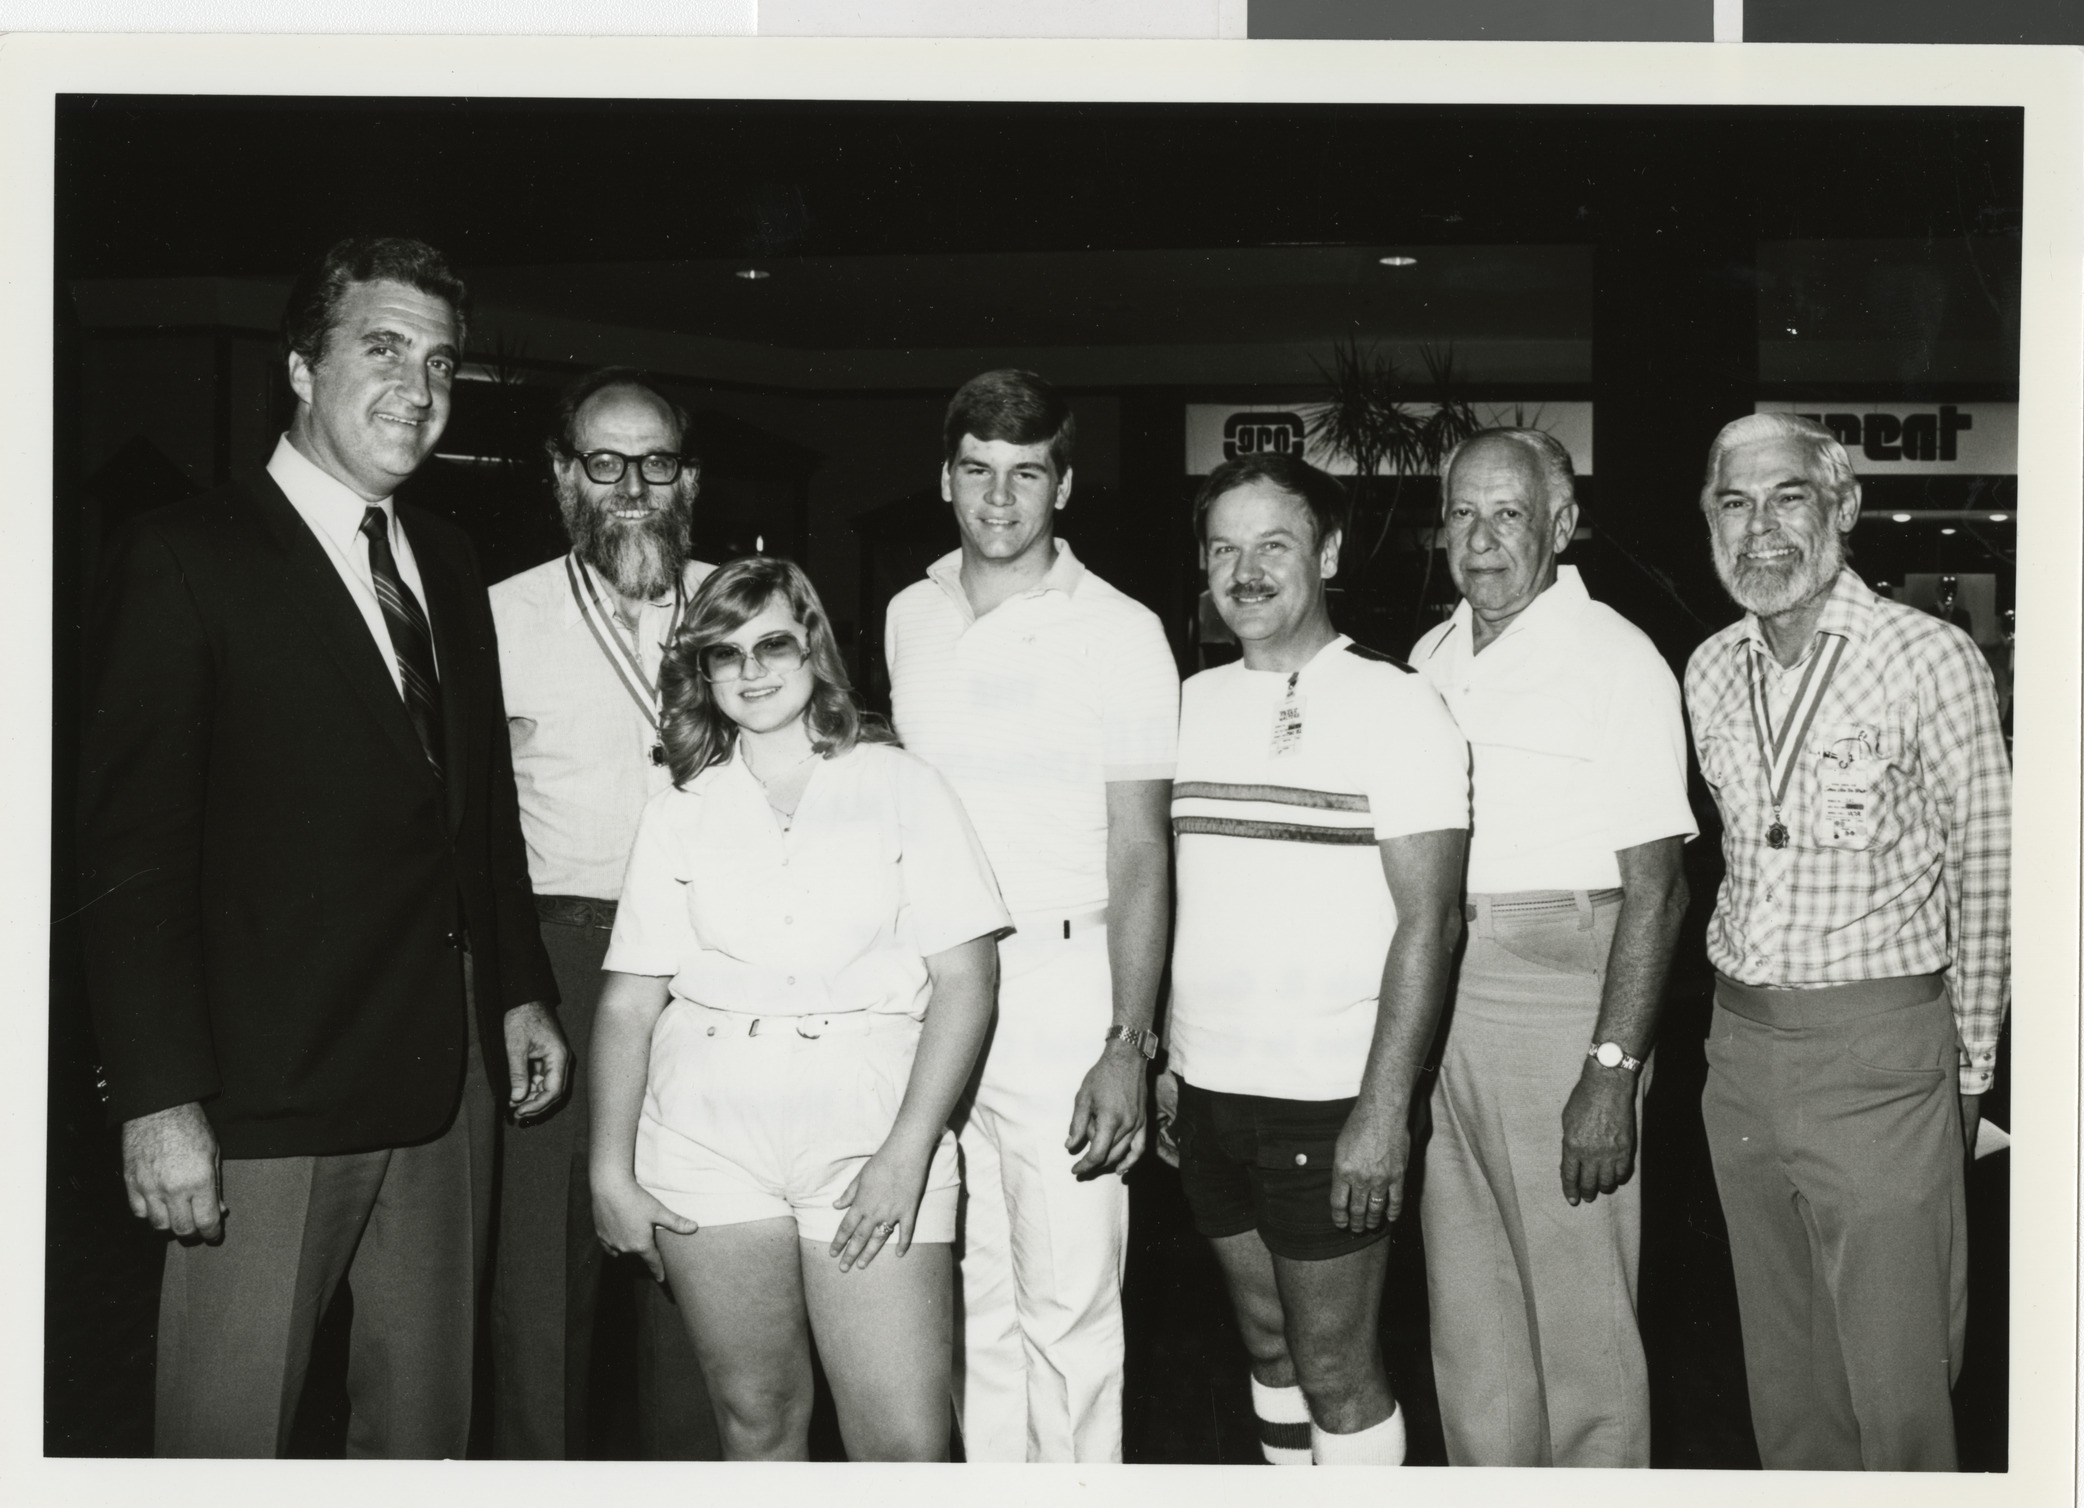 Photograph of Ron Lurie with members of the Nevada Camera Club, 1983